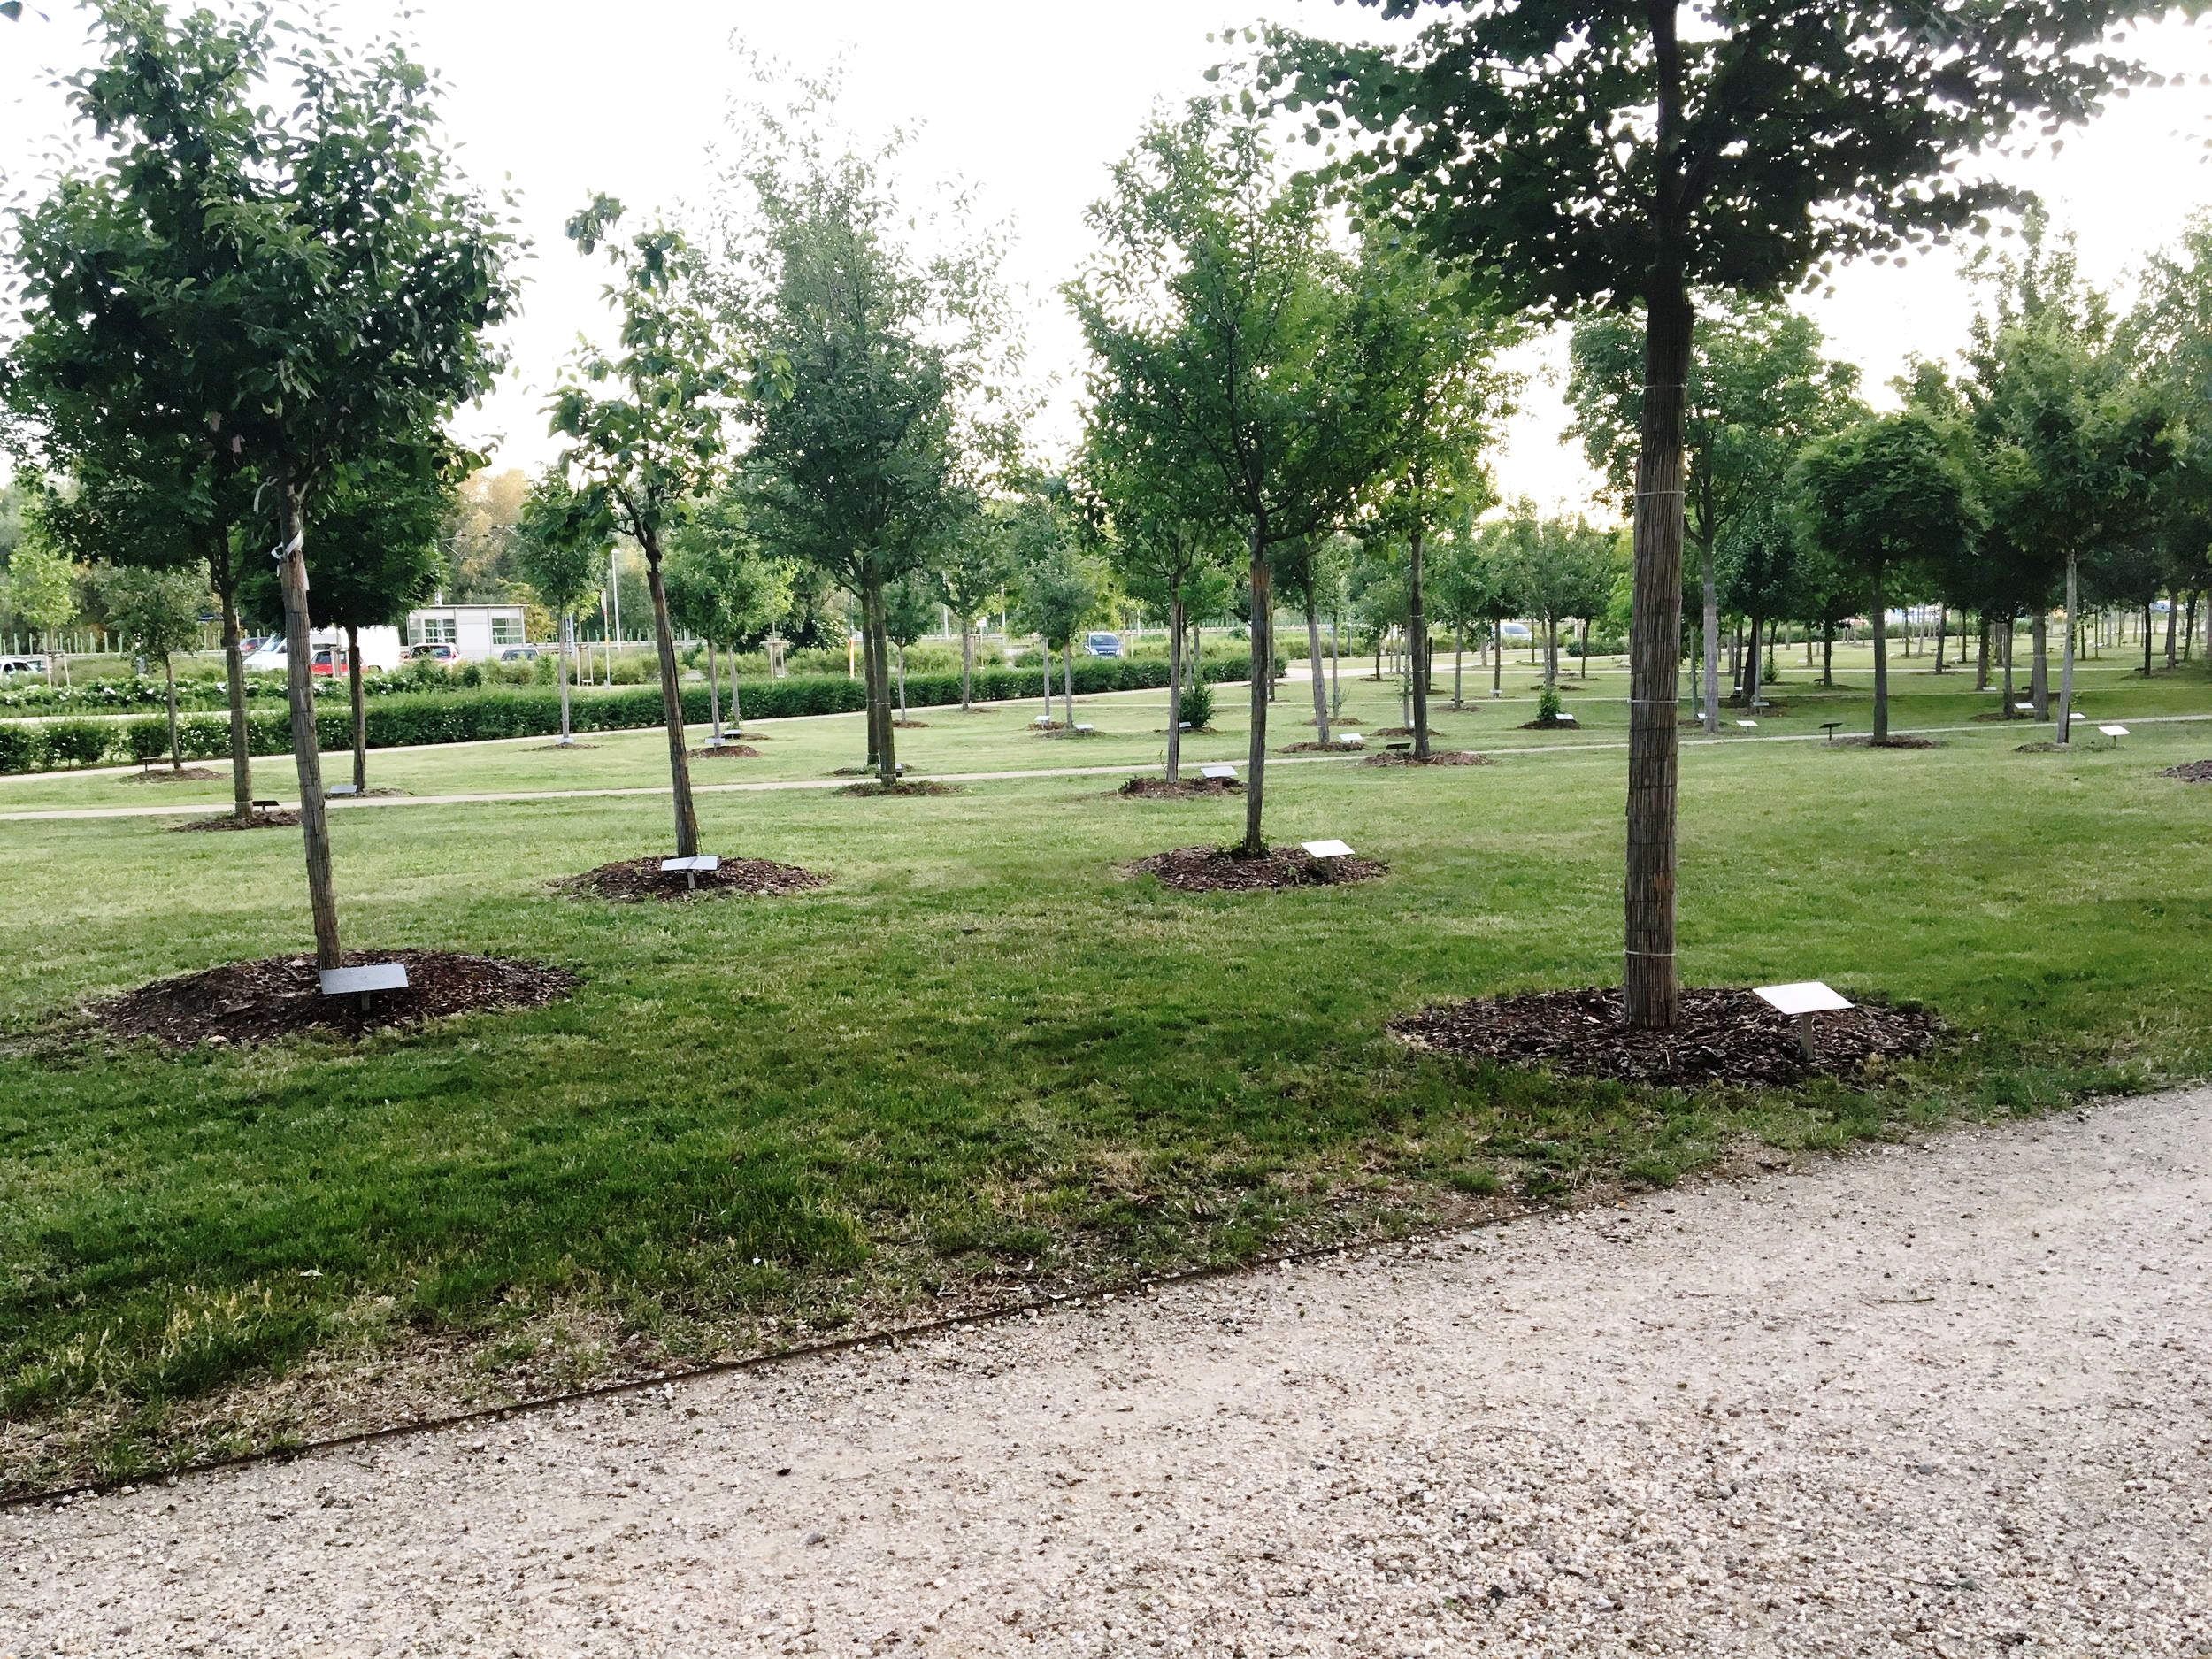  Wittenberg city park is full of trees planted and donated from churches all of the world wishing to celebrate the 500th anniversary.&nbsp;&nbsp; 